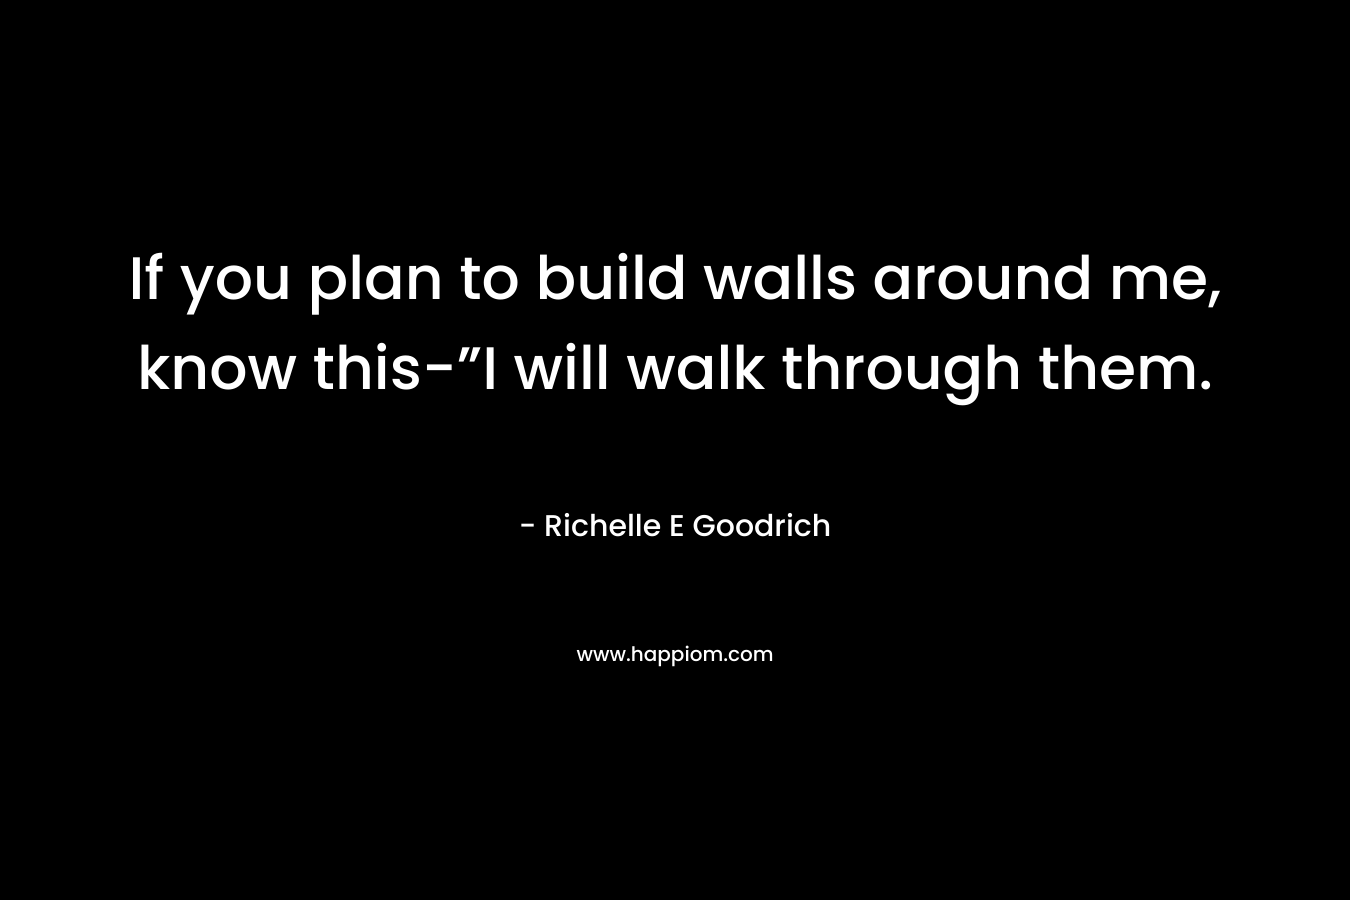 If you plan to build walls around me, know this-”I will walk through them.